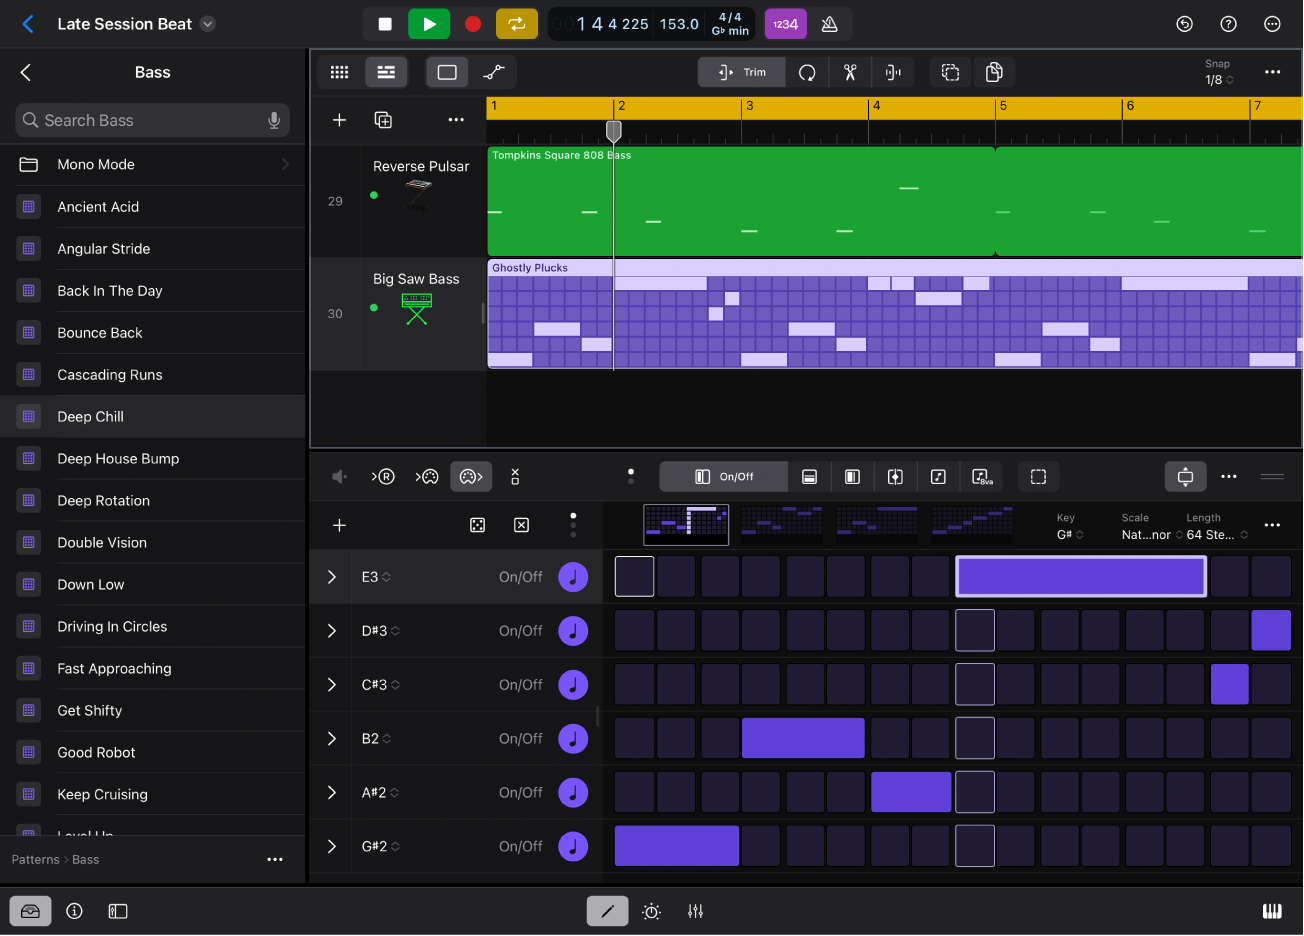 Figure. Logic Pro for iPad showing Patterns view in the Browser.